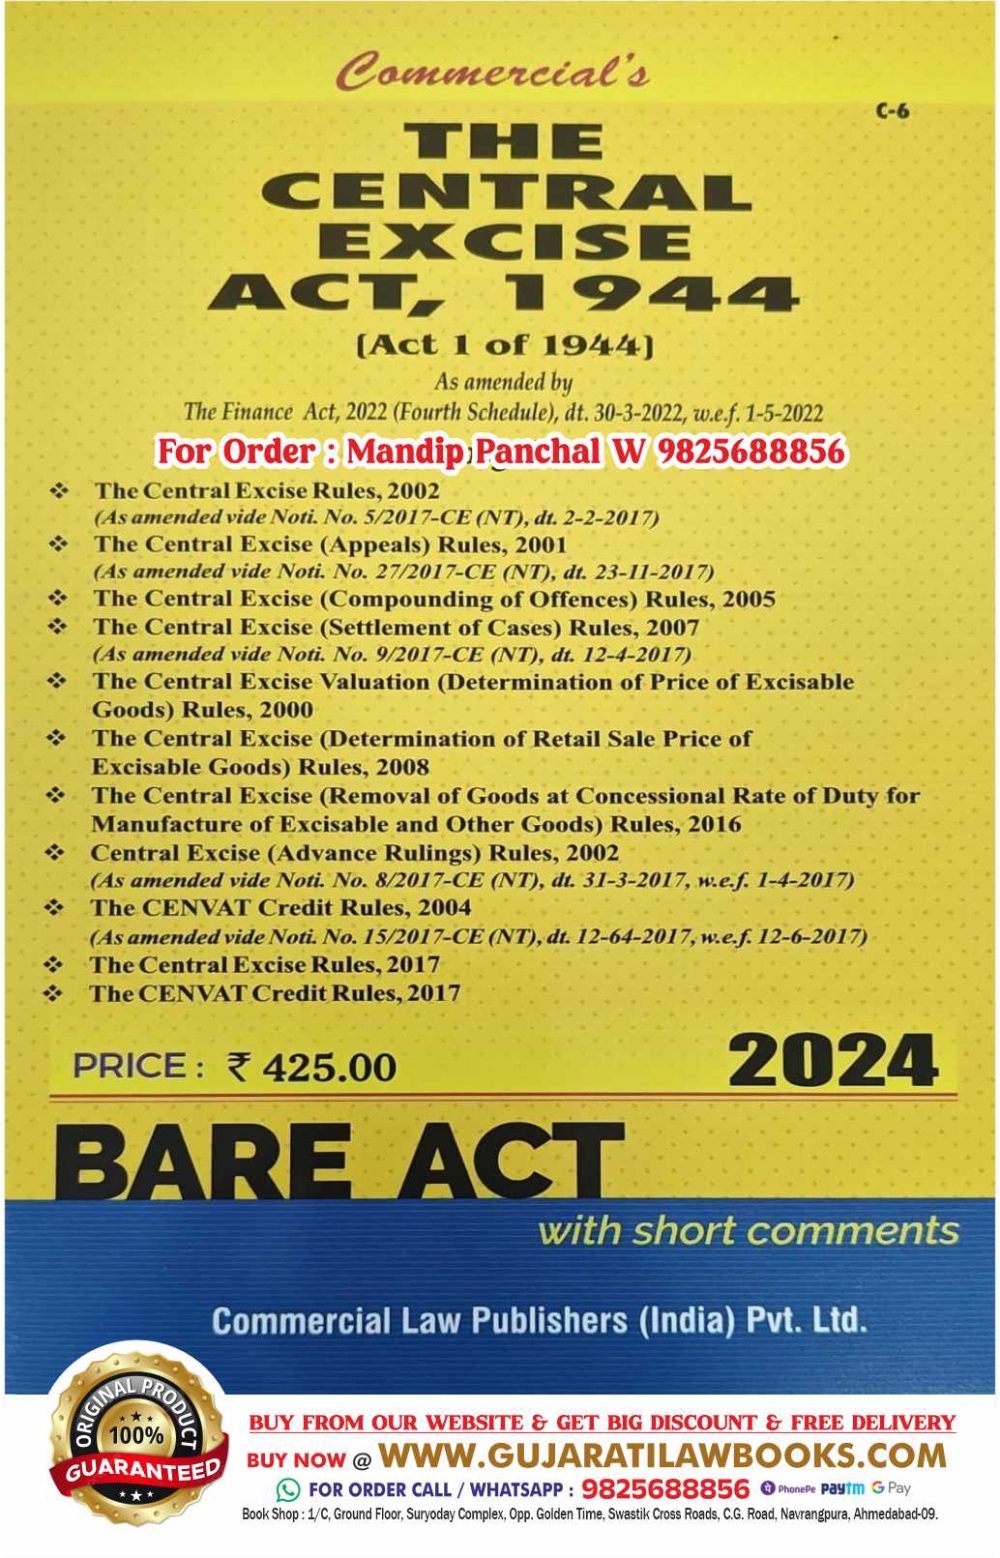 The Central Excise Act, 1944 - BARE ACT - Latest 2024 Edition Commercial